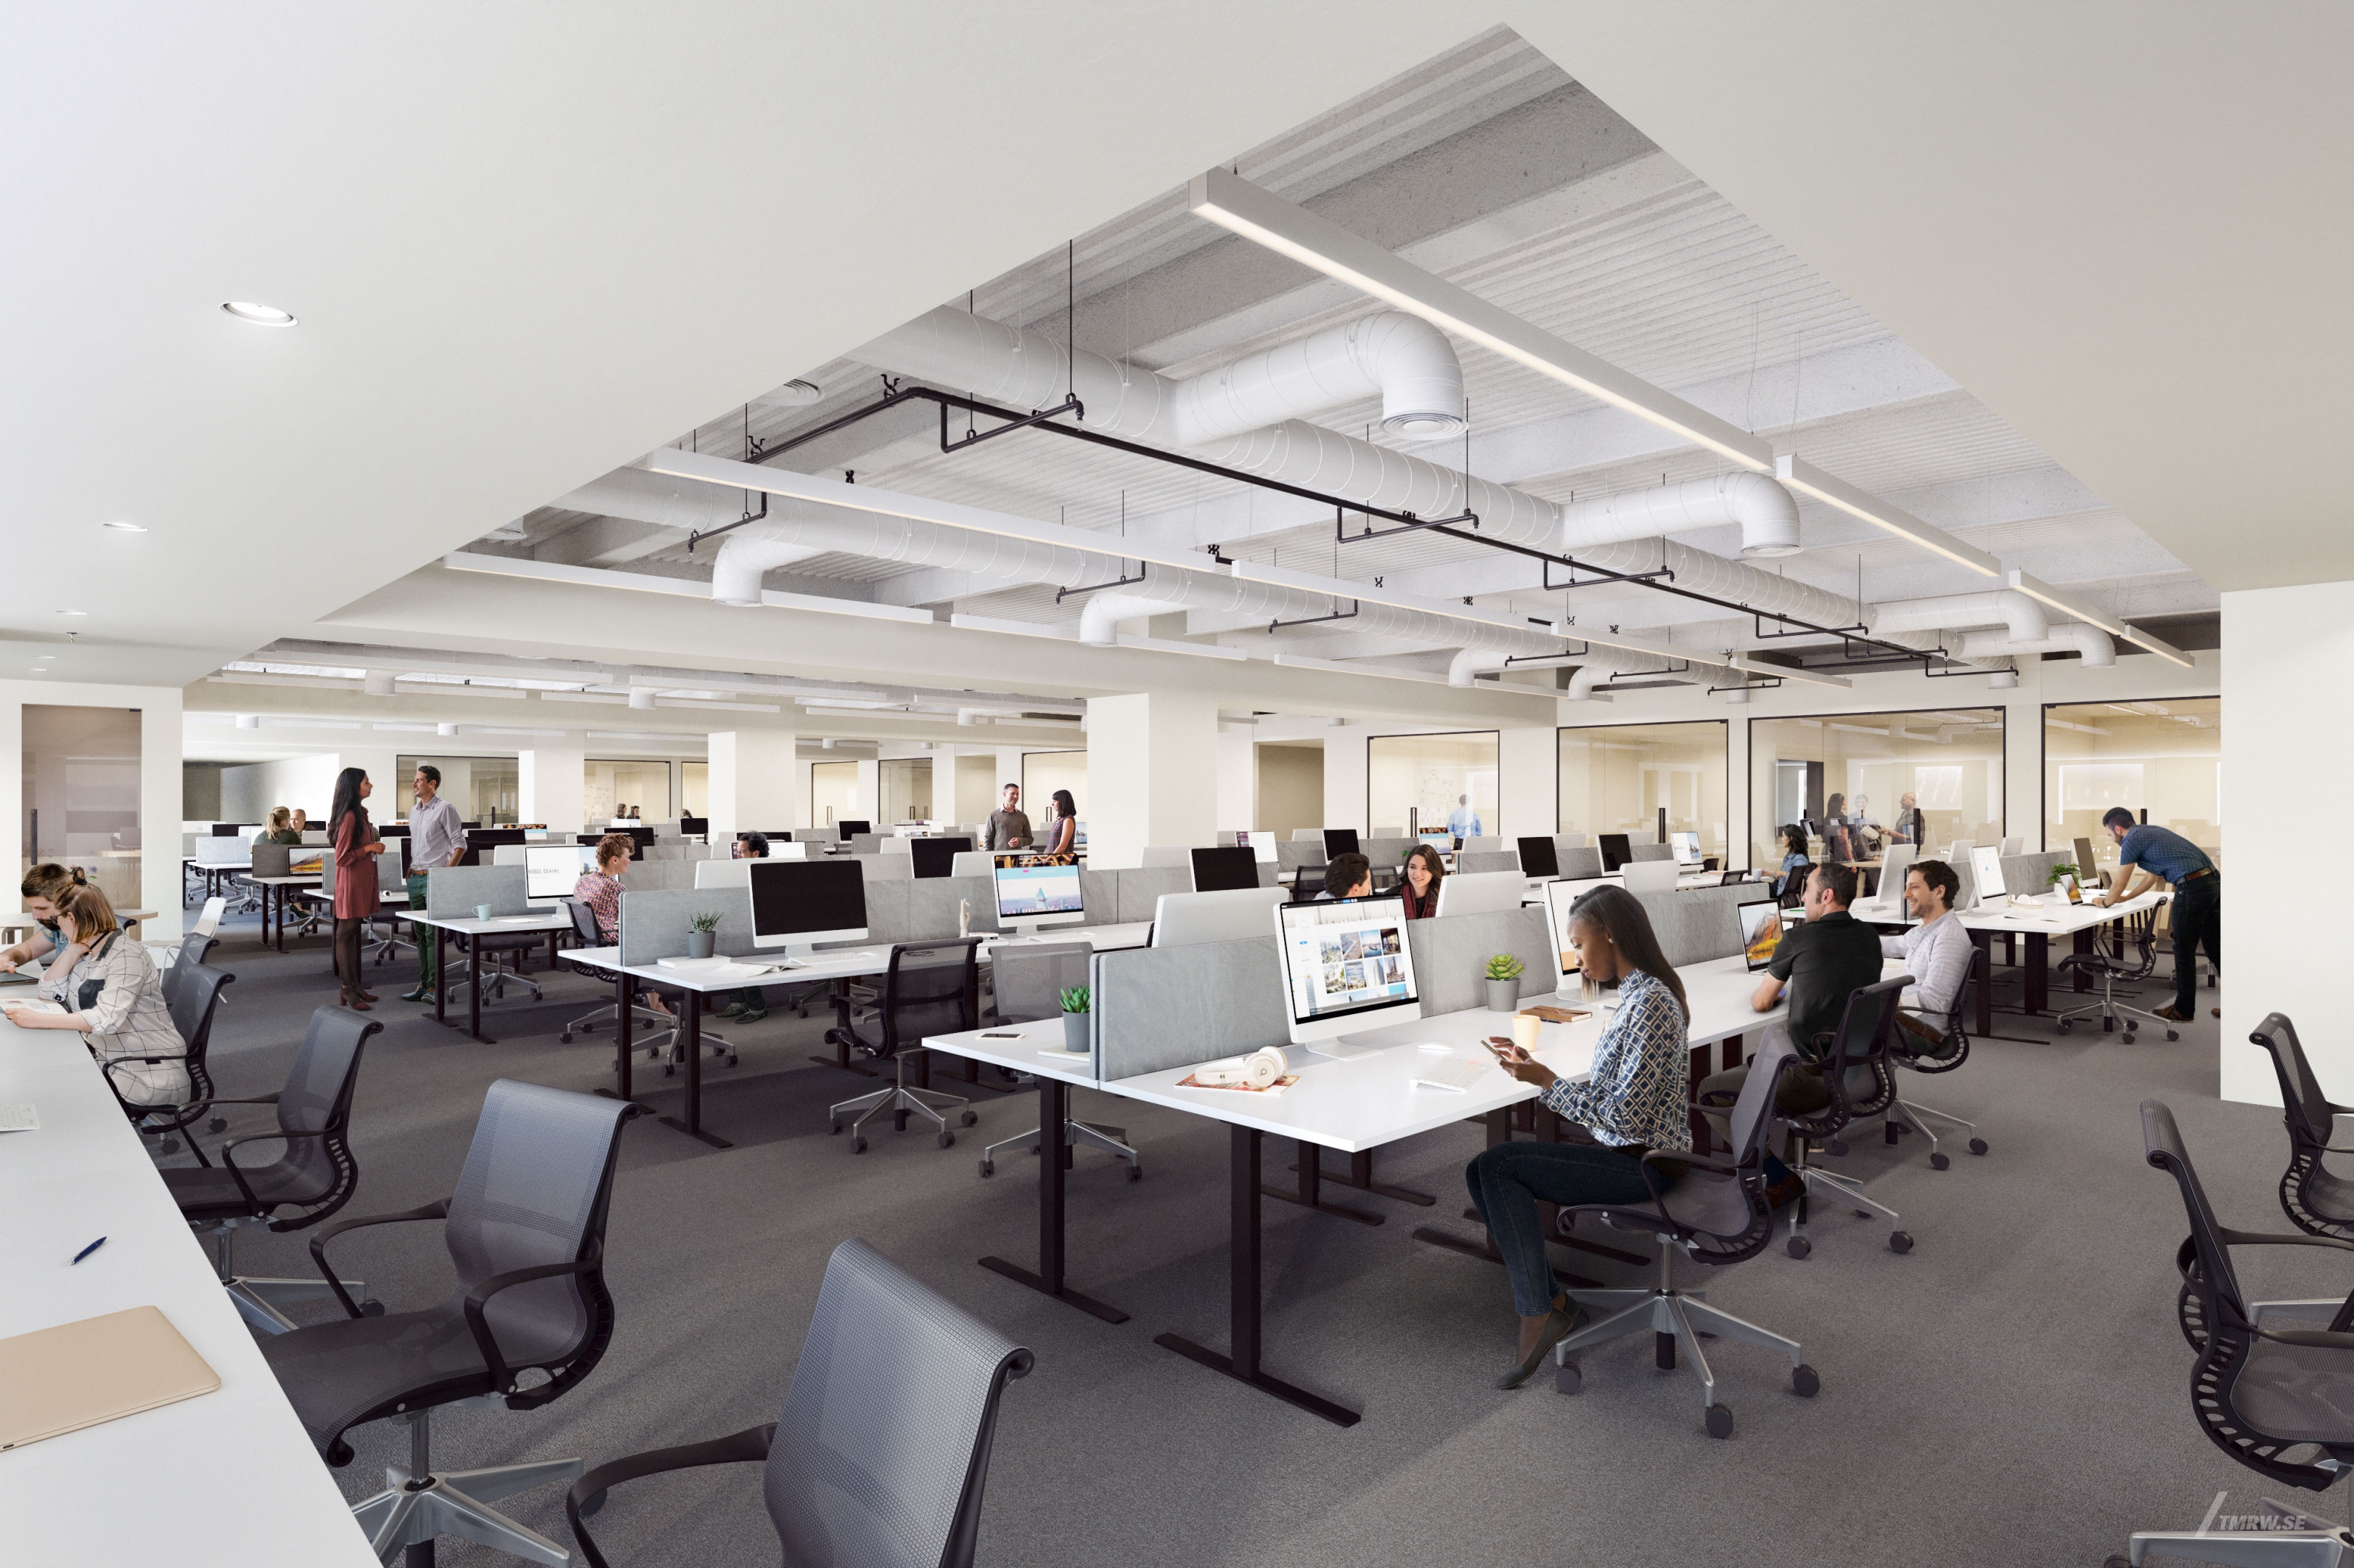 Architectural visualization of 225 Liberty for Brookfield Properties. An image of the interior of a office with people sitting by desks in daylight.